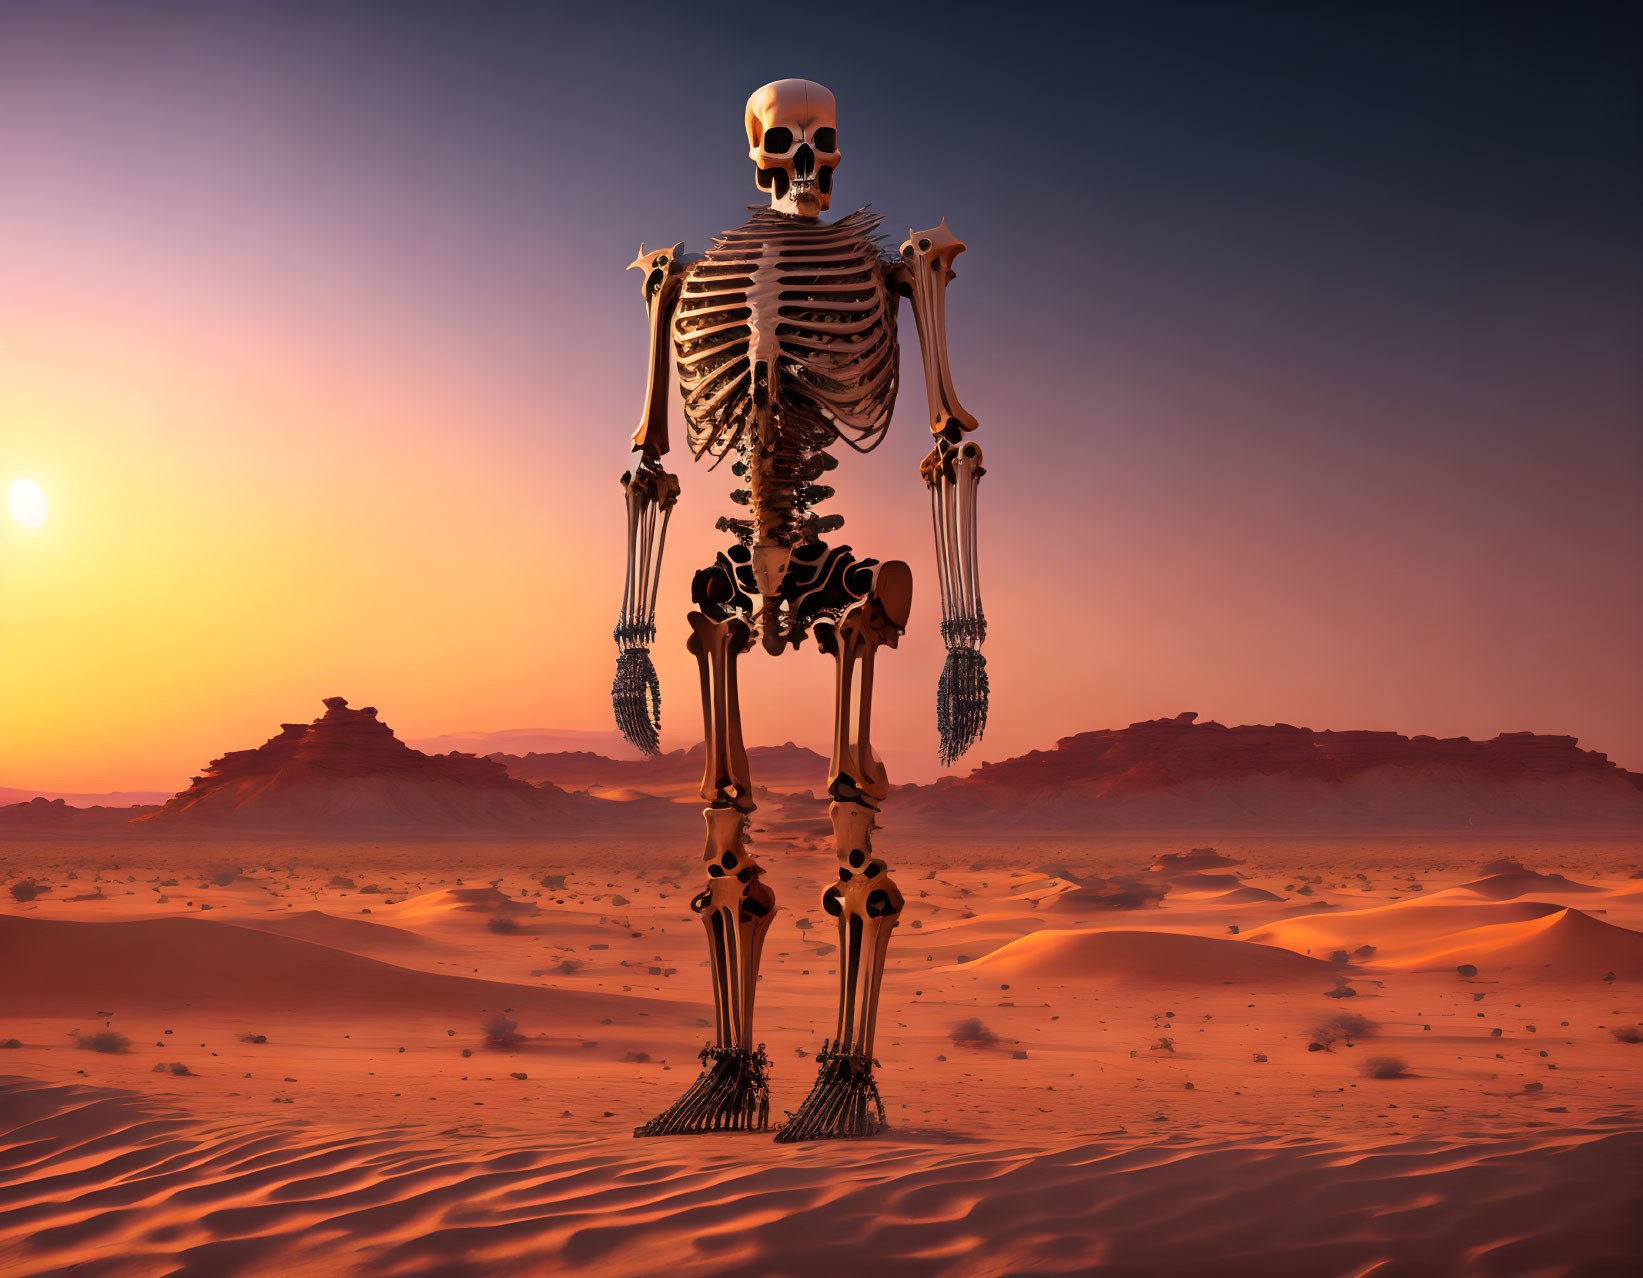 Human skeleton in desert with sand dunes and setting sun.